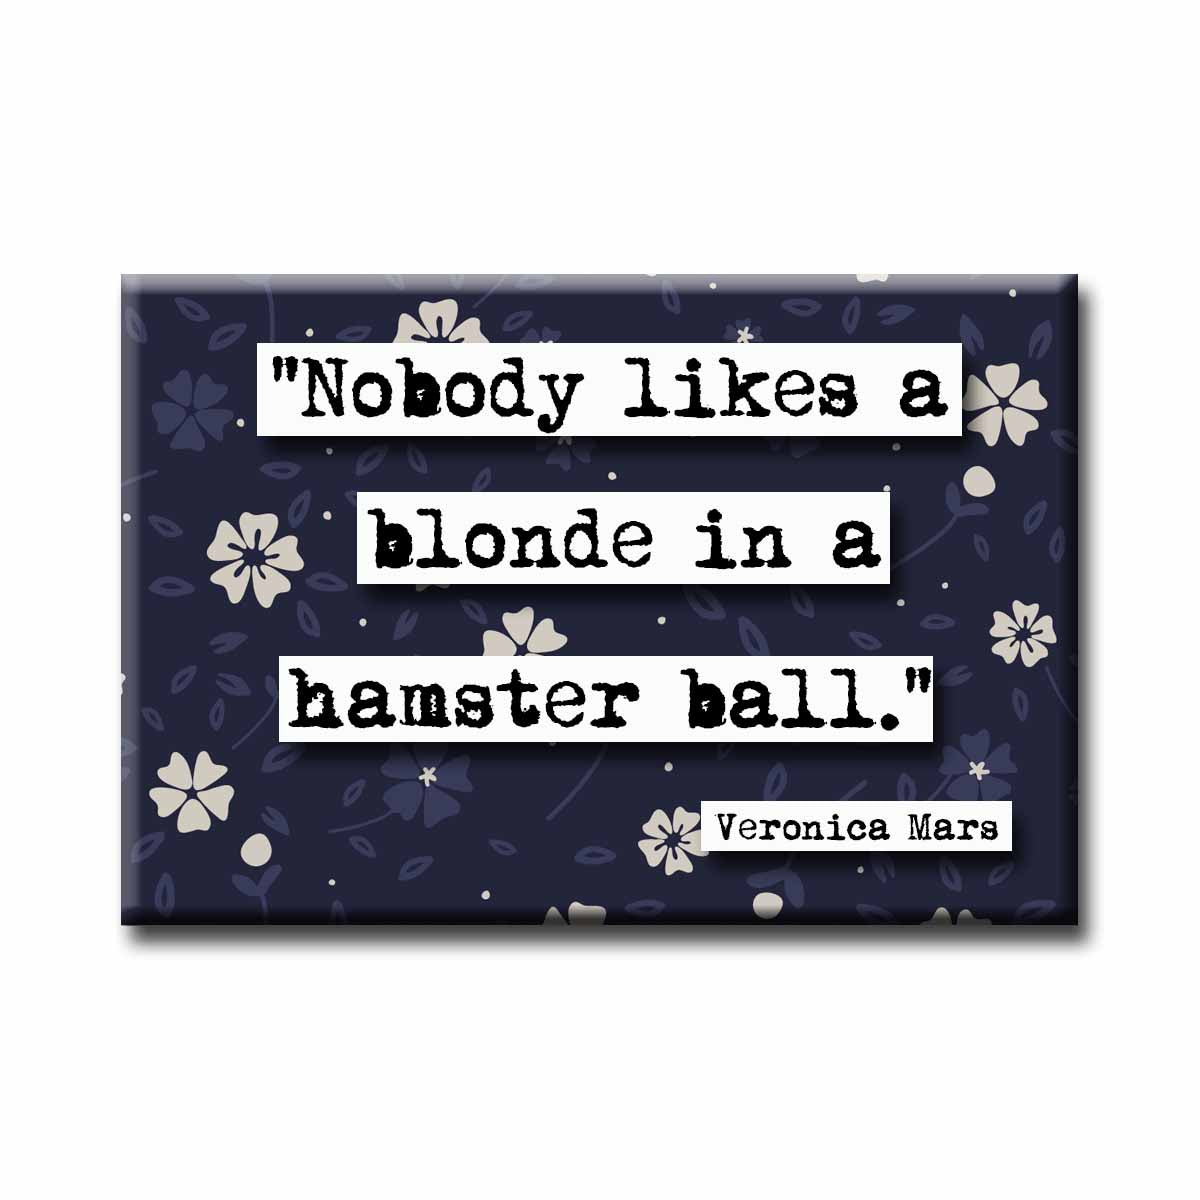 Veronica Mars Blonde in a Hamster Ball Quote Magnet (no.539)